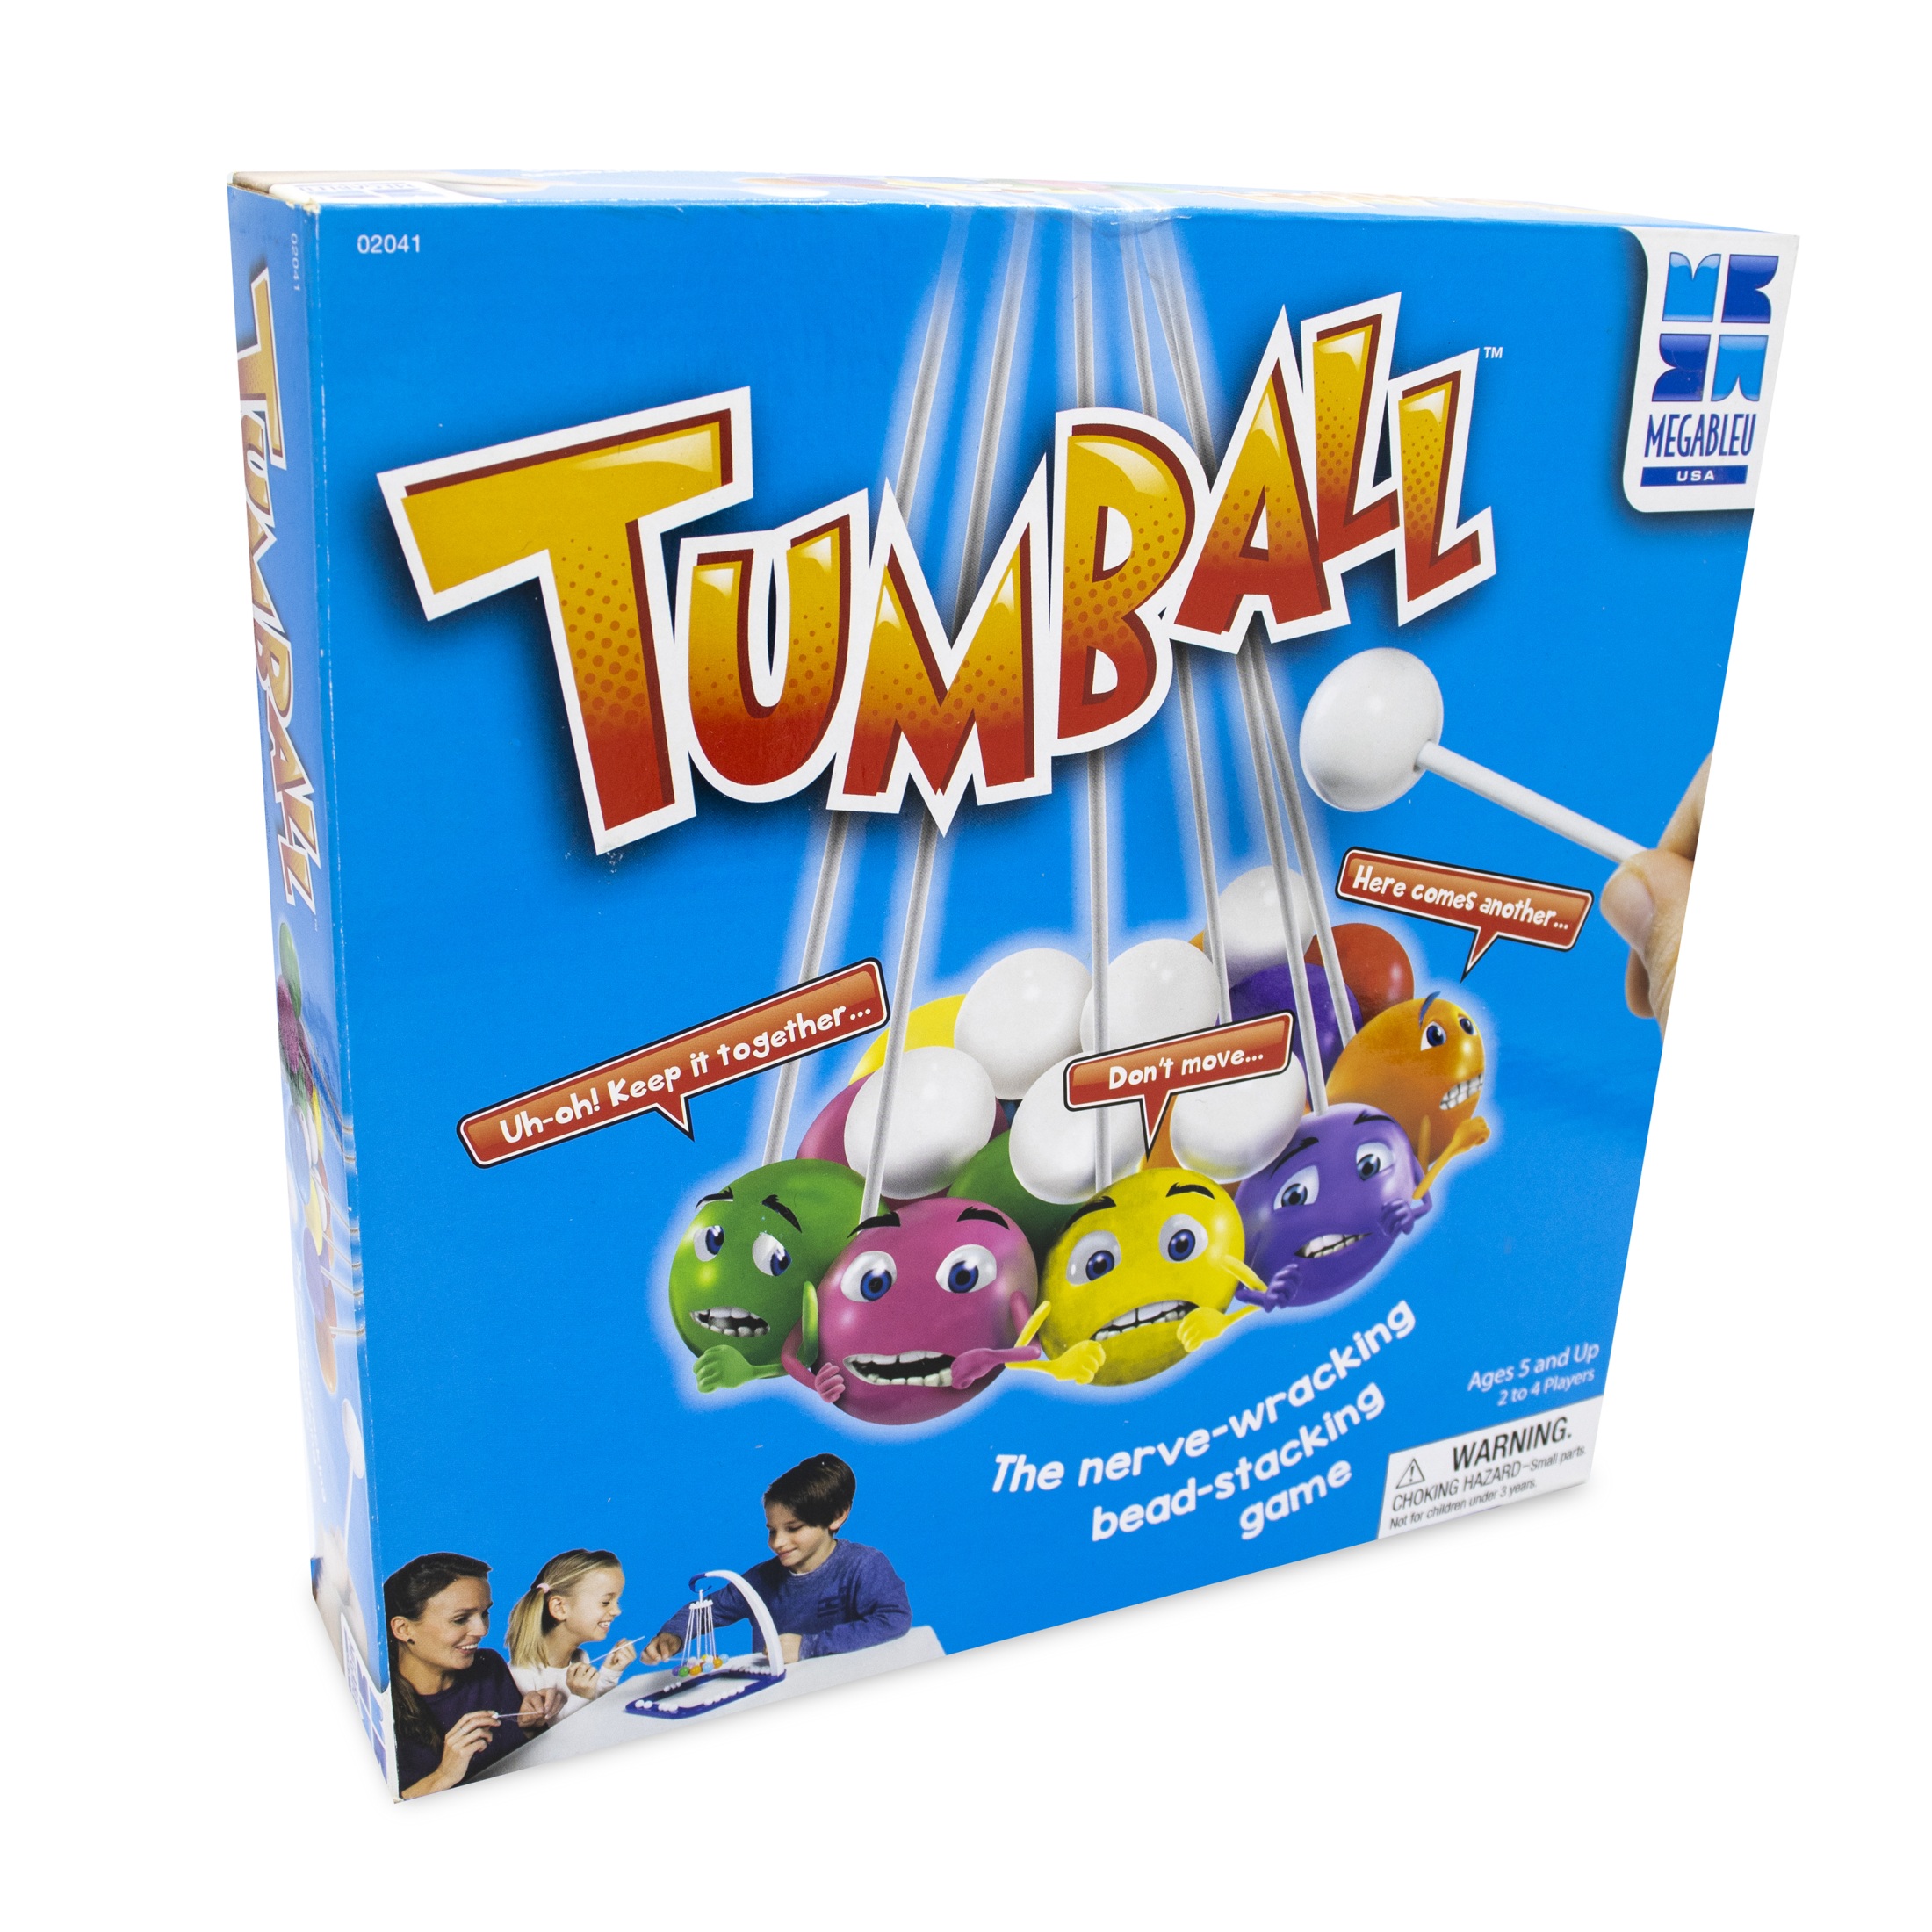 Megableu USA | Tumball Children's Bead Stacking Game for Ages 6 and Up and 2 to 4 Players - image 1 of 6